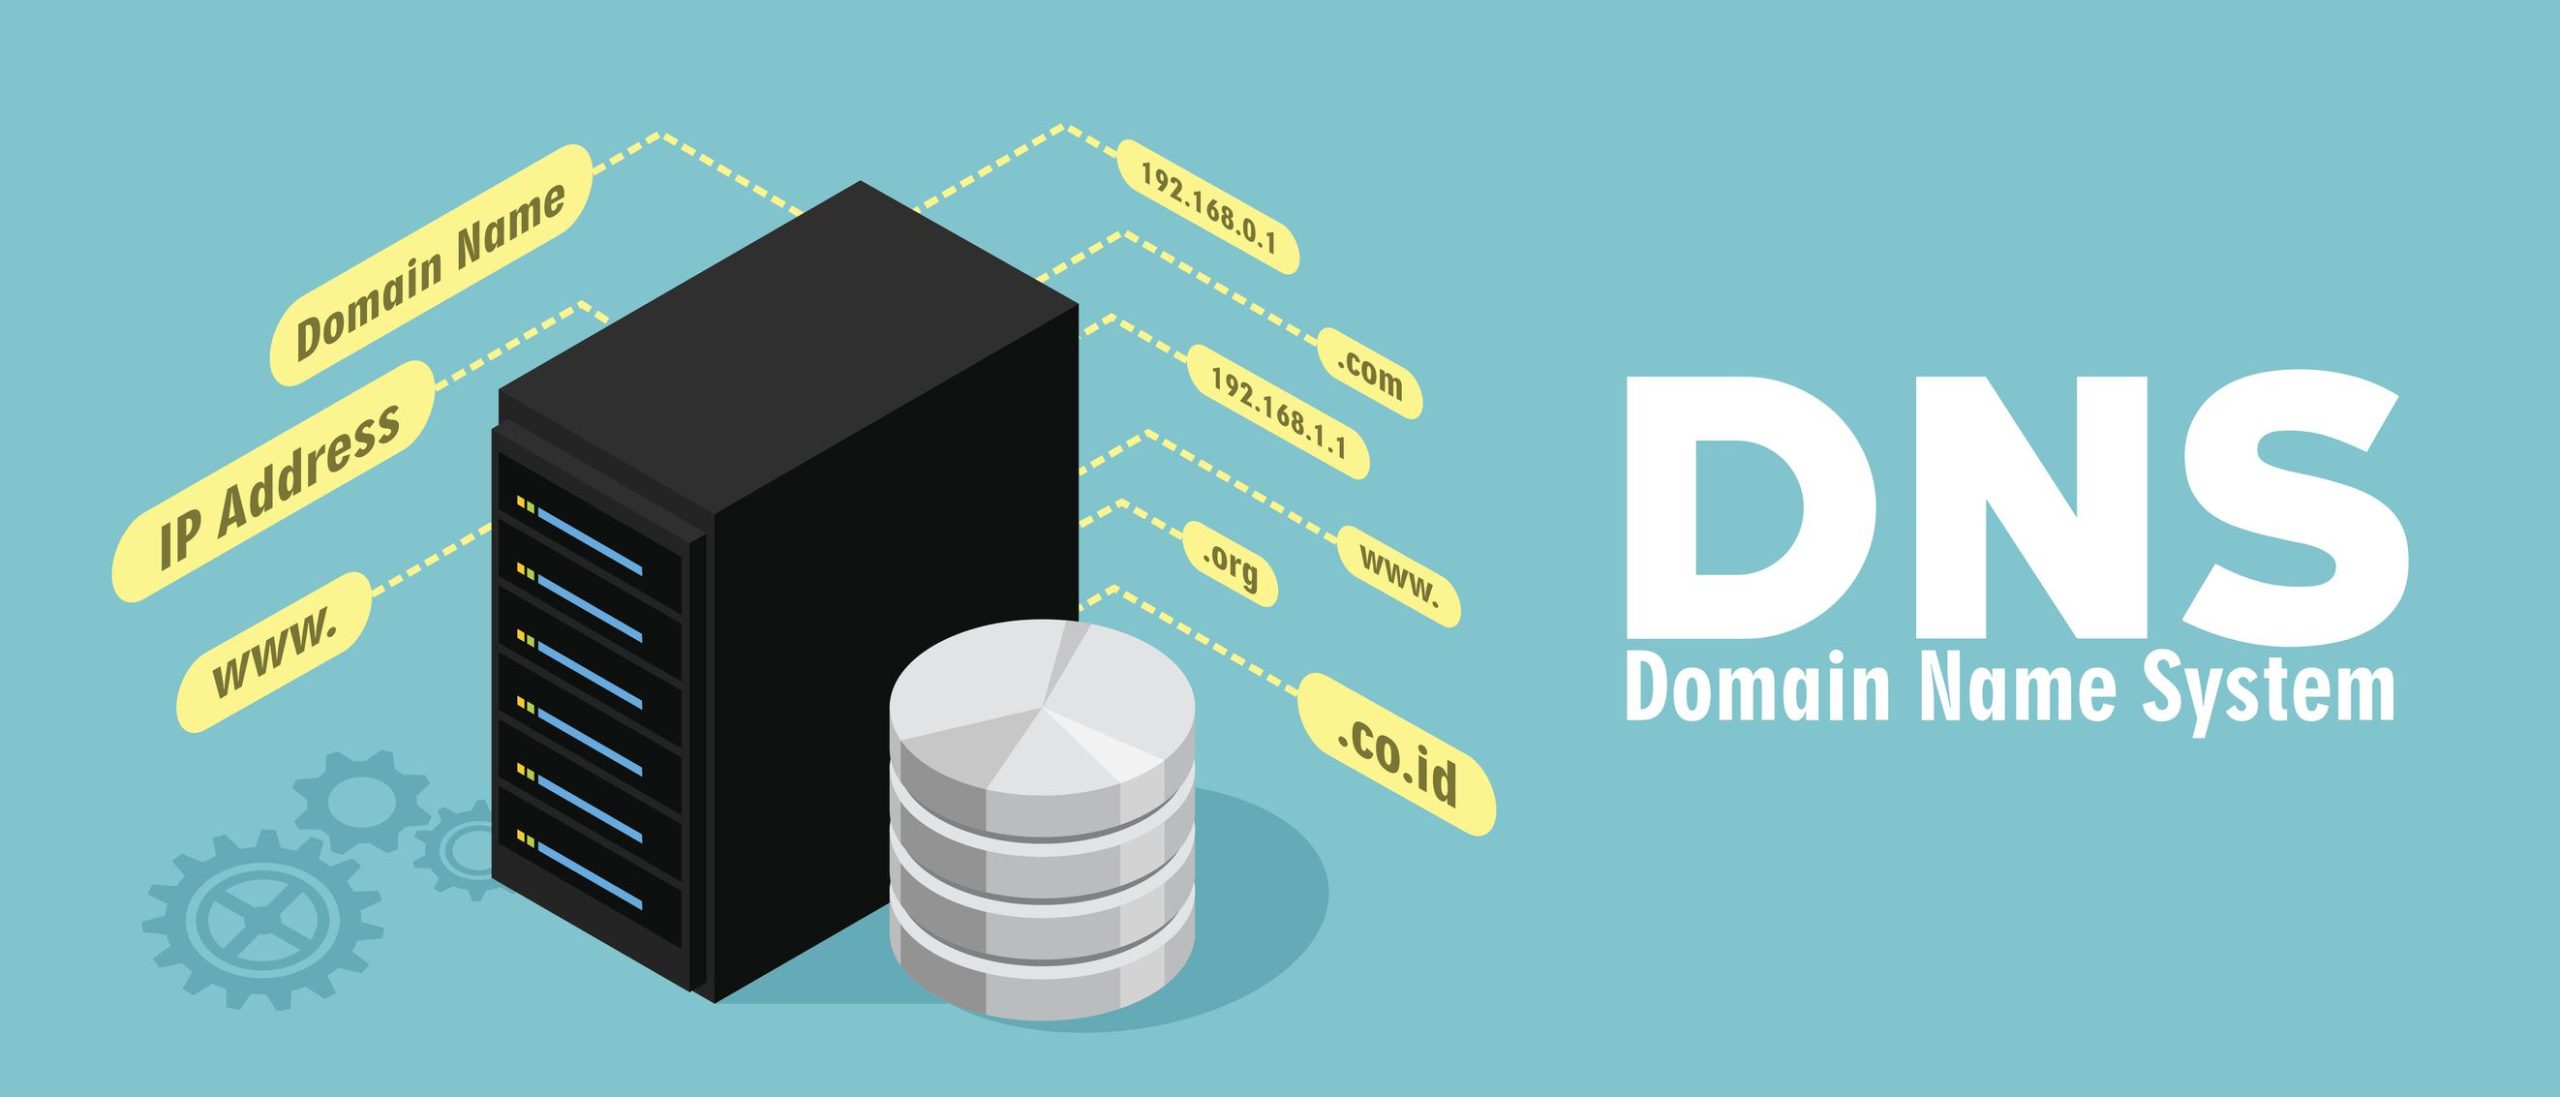 How to access your web site before DNS propagation is complete